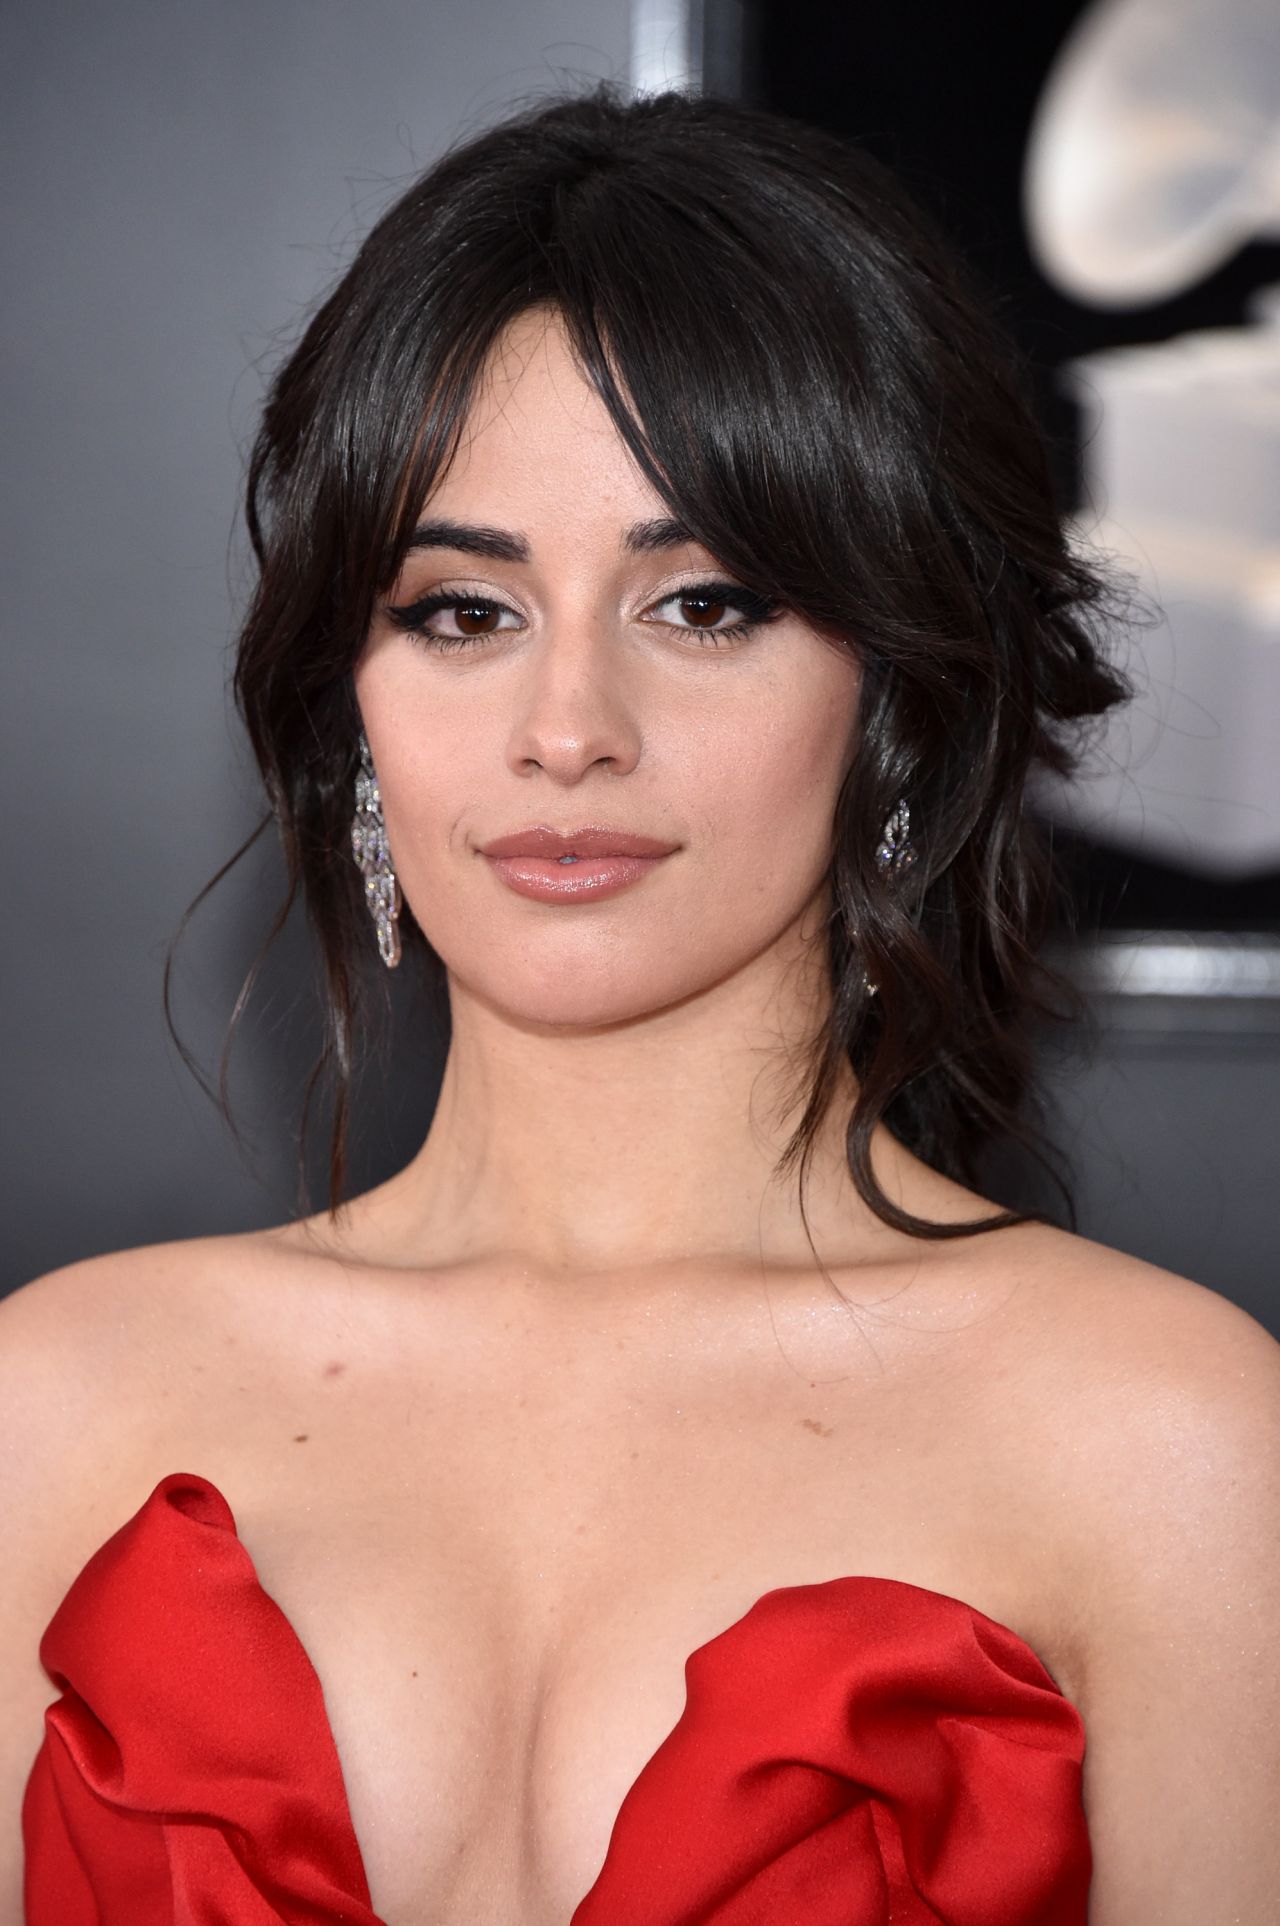 Does Camila Cabello have any chance of passing in Spain?